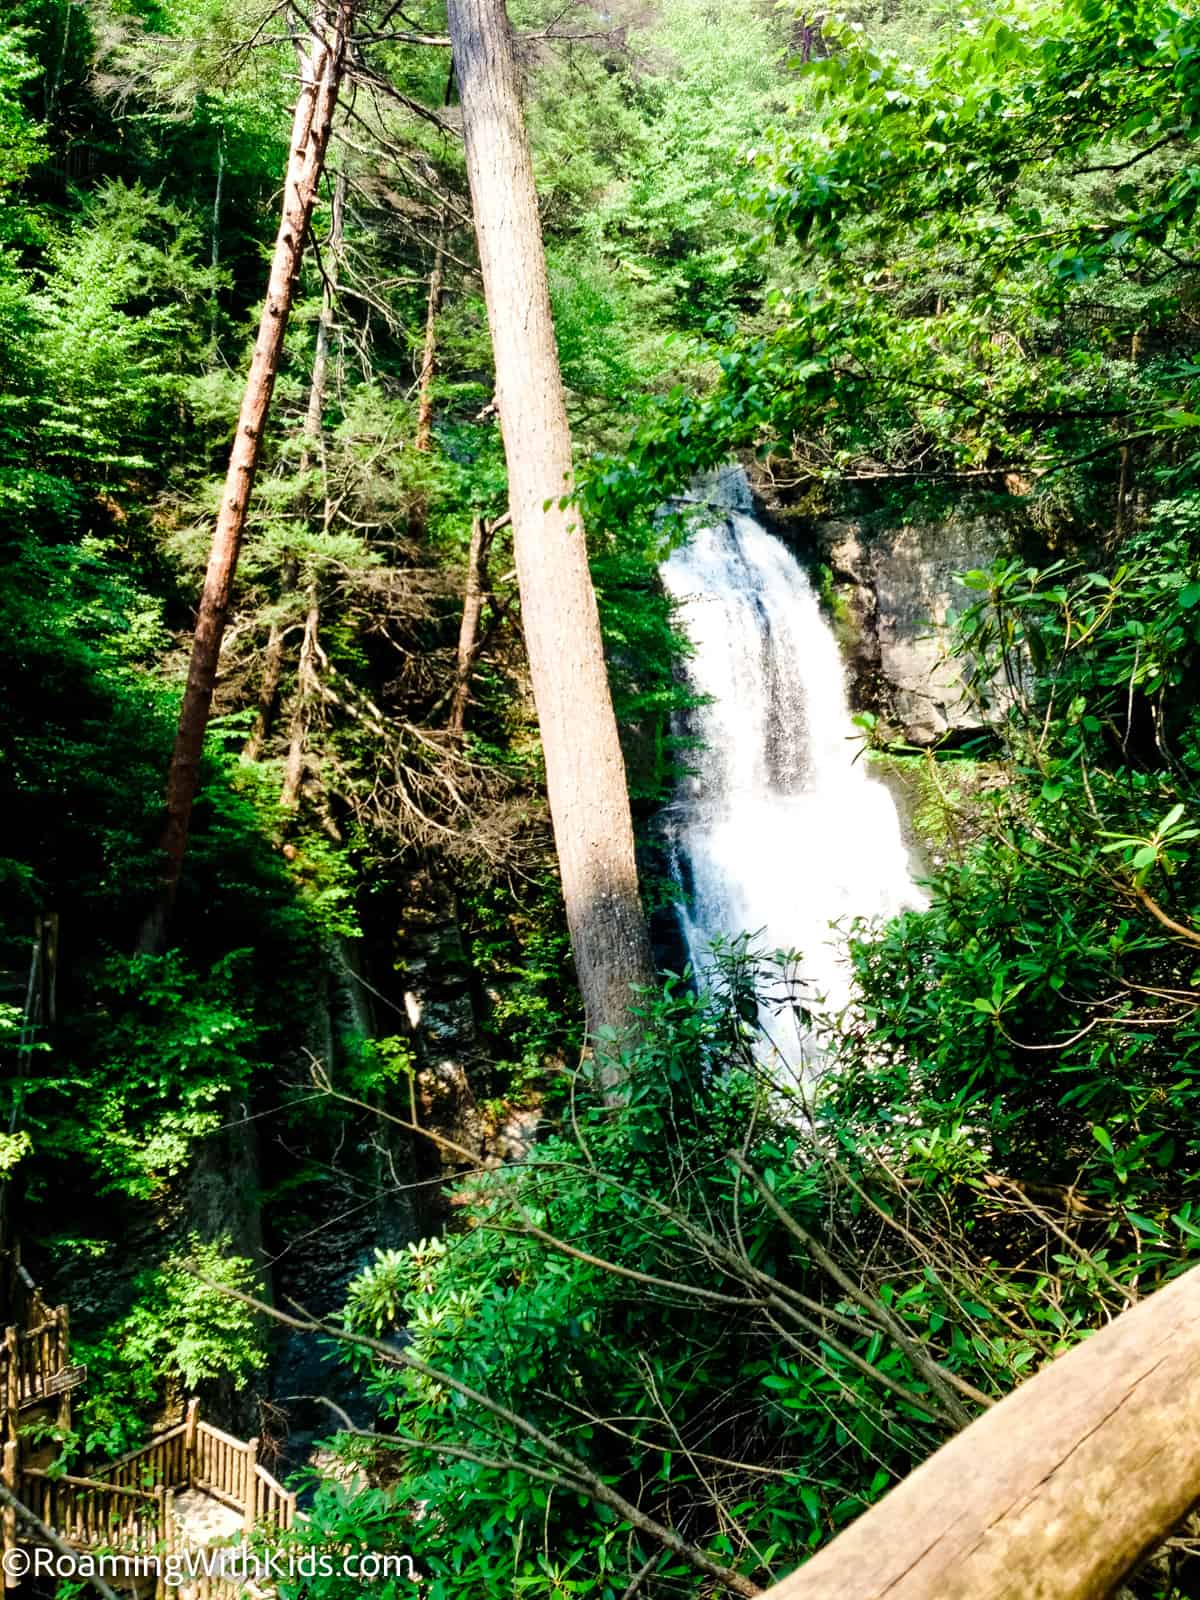 Things to do in the Poconos with kids - bushkill Falls